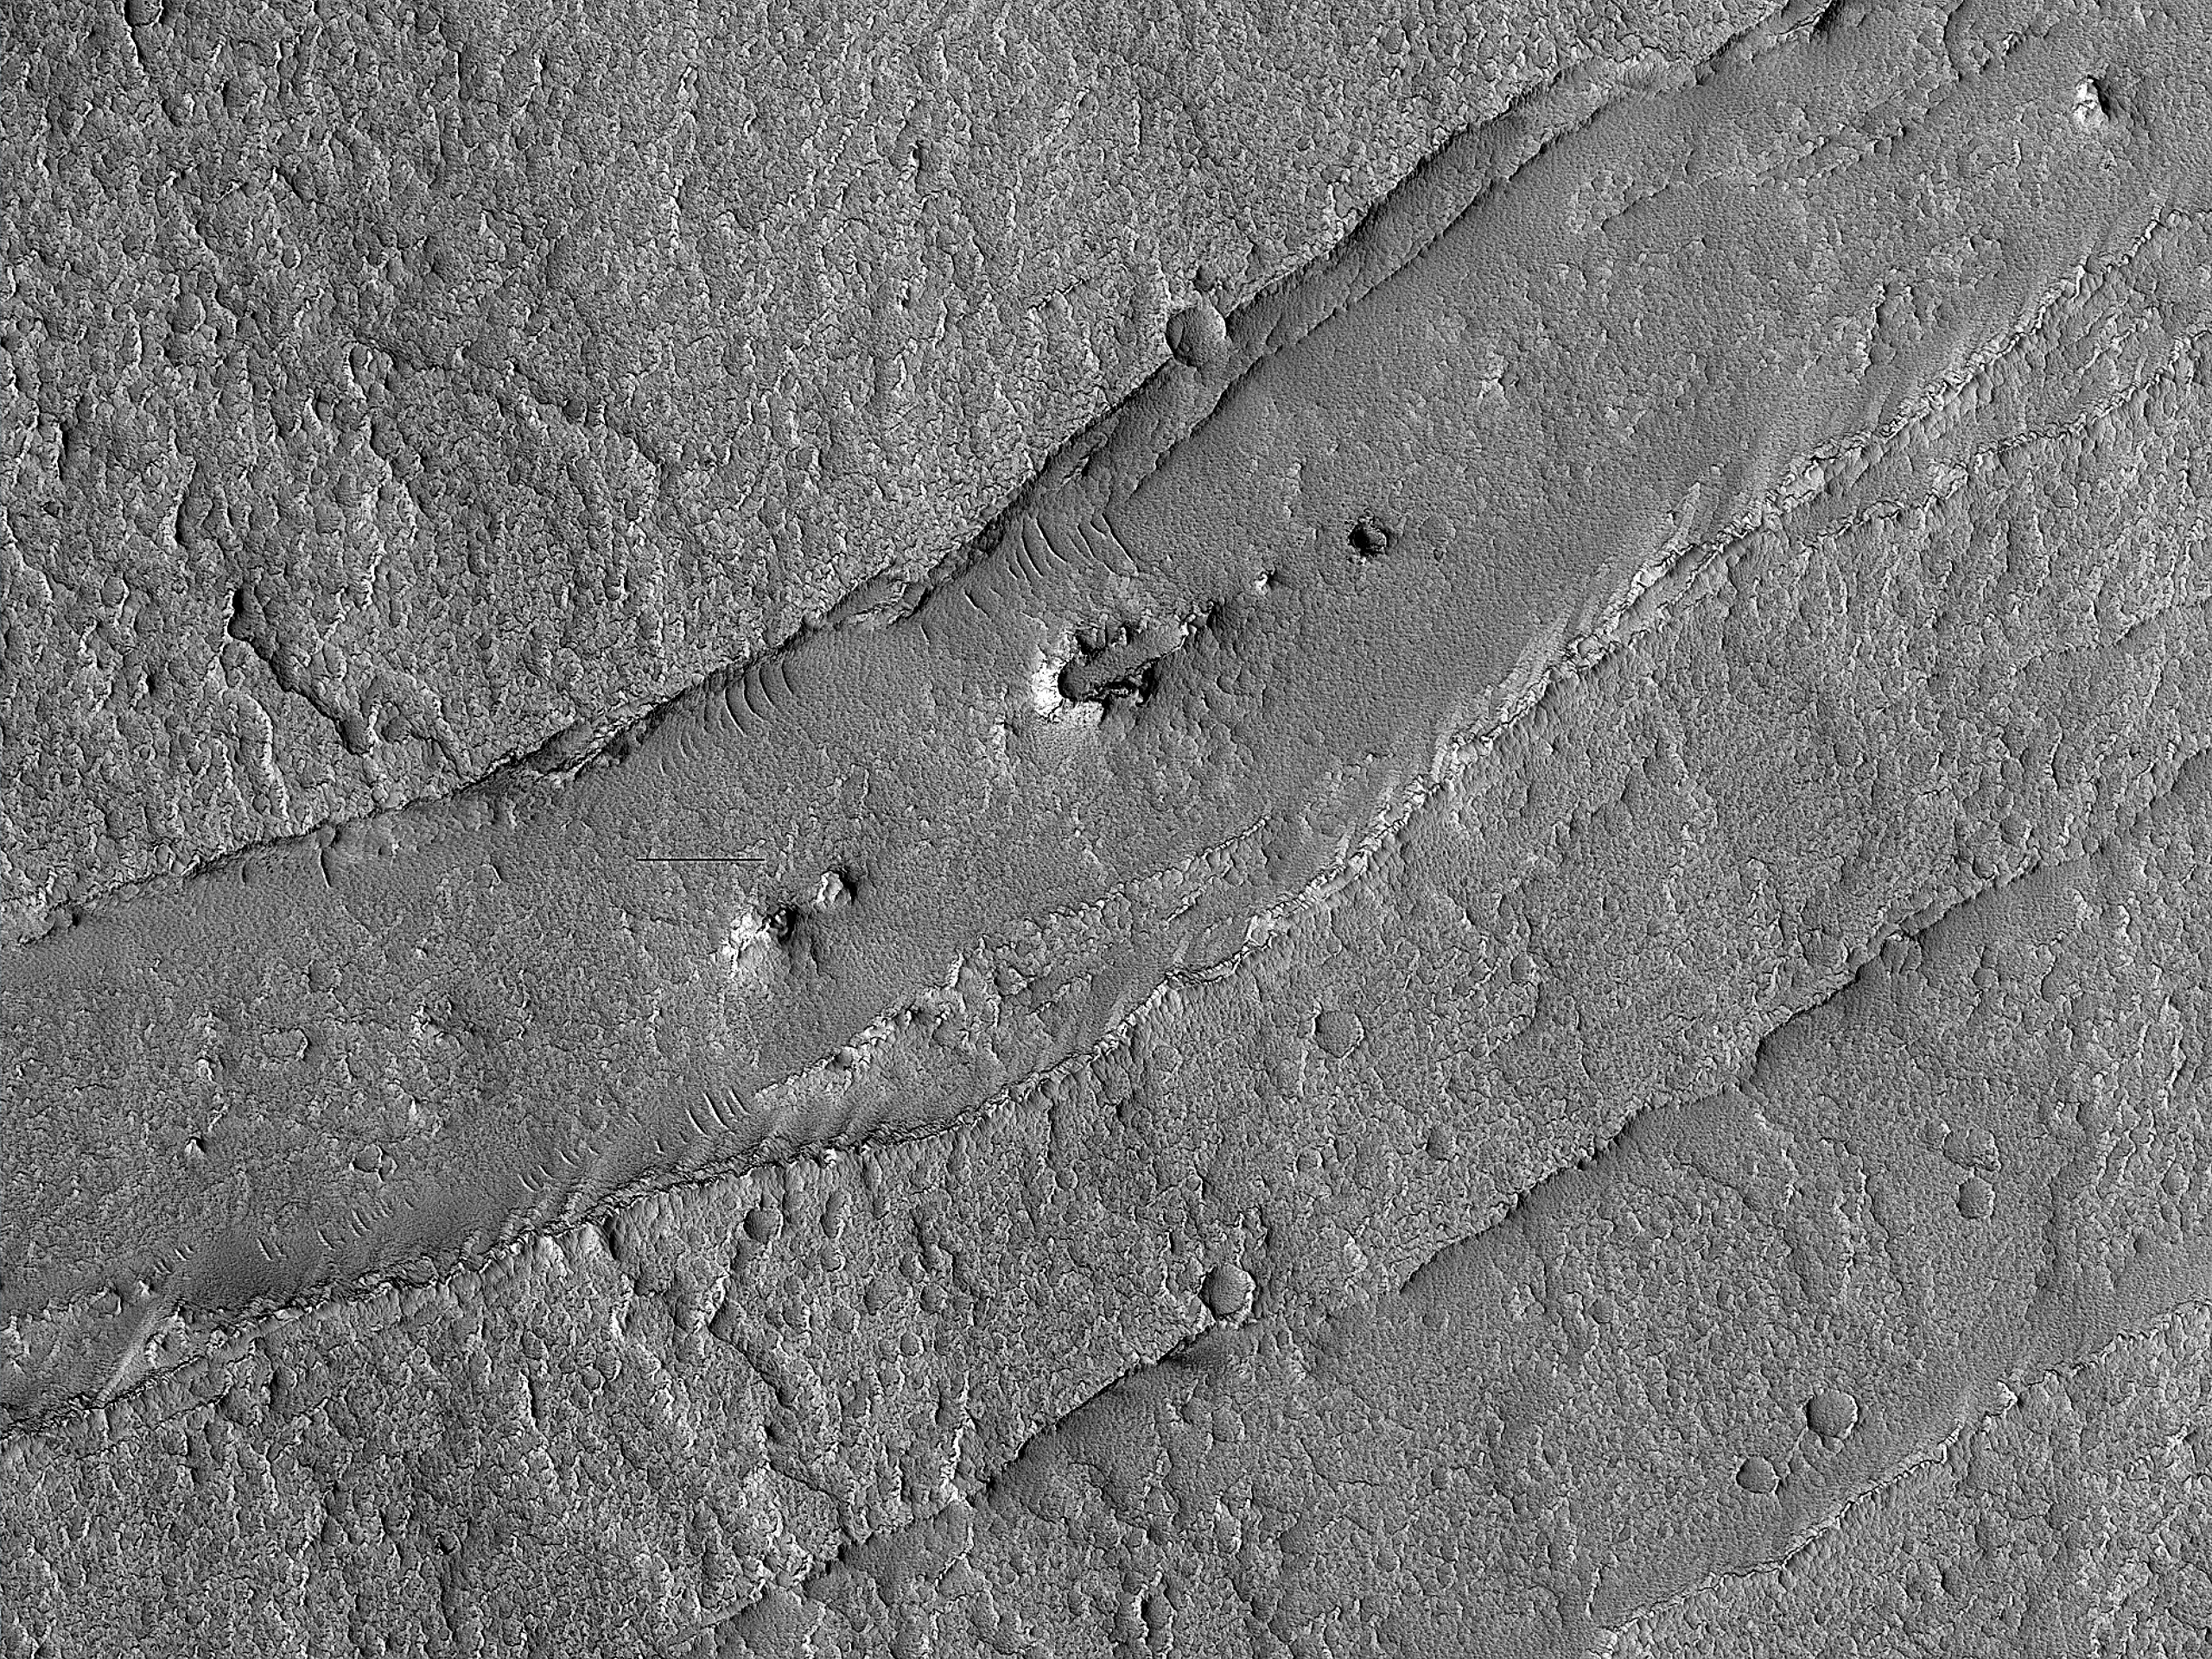 Fossae East of Arsia Mons